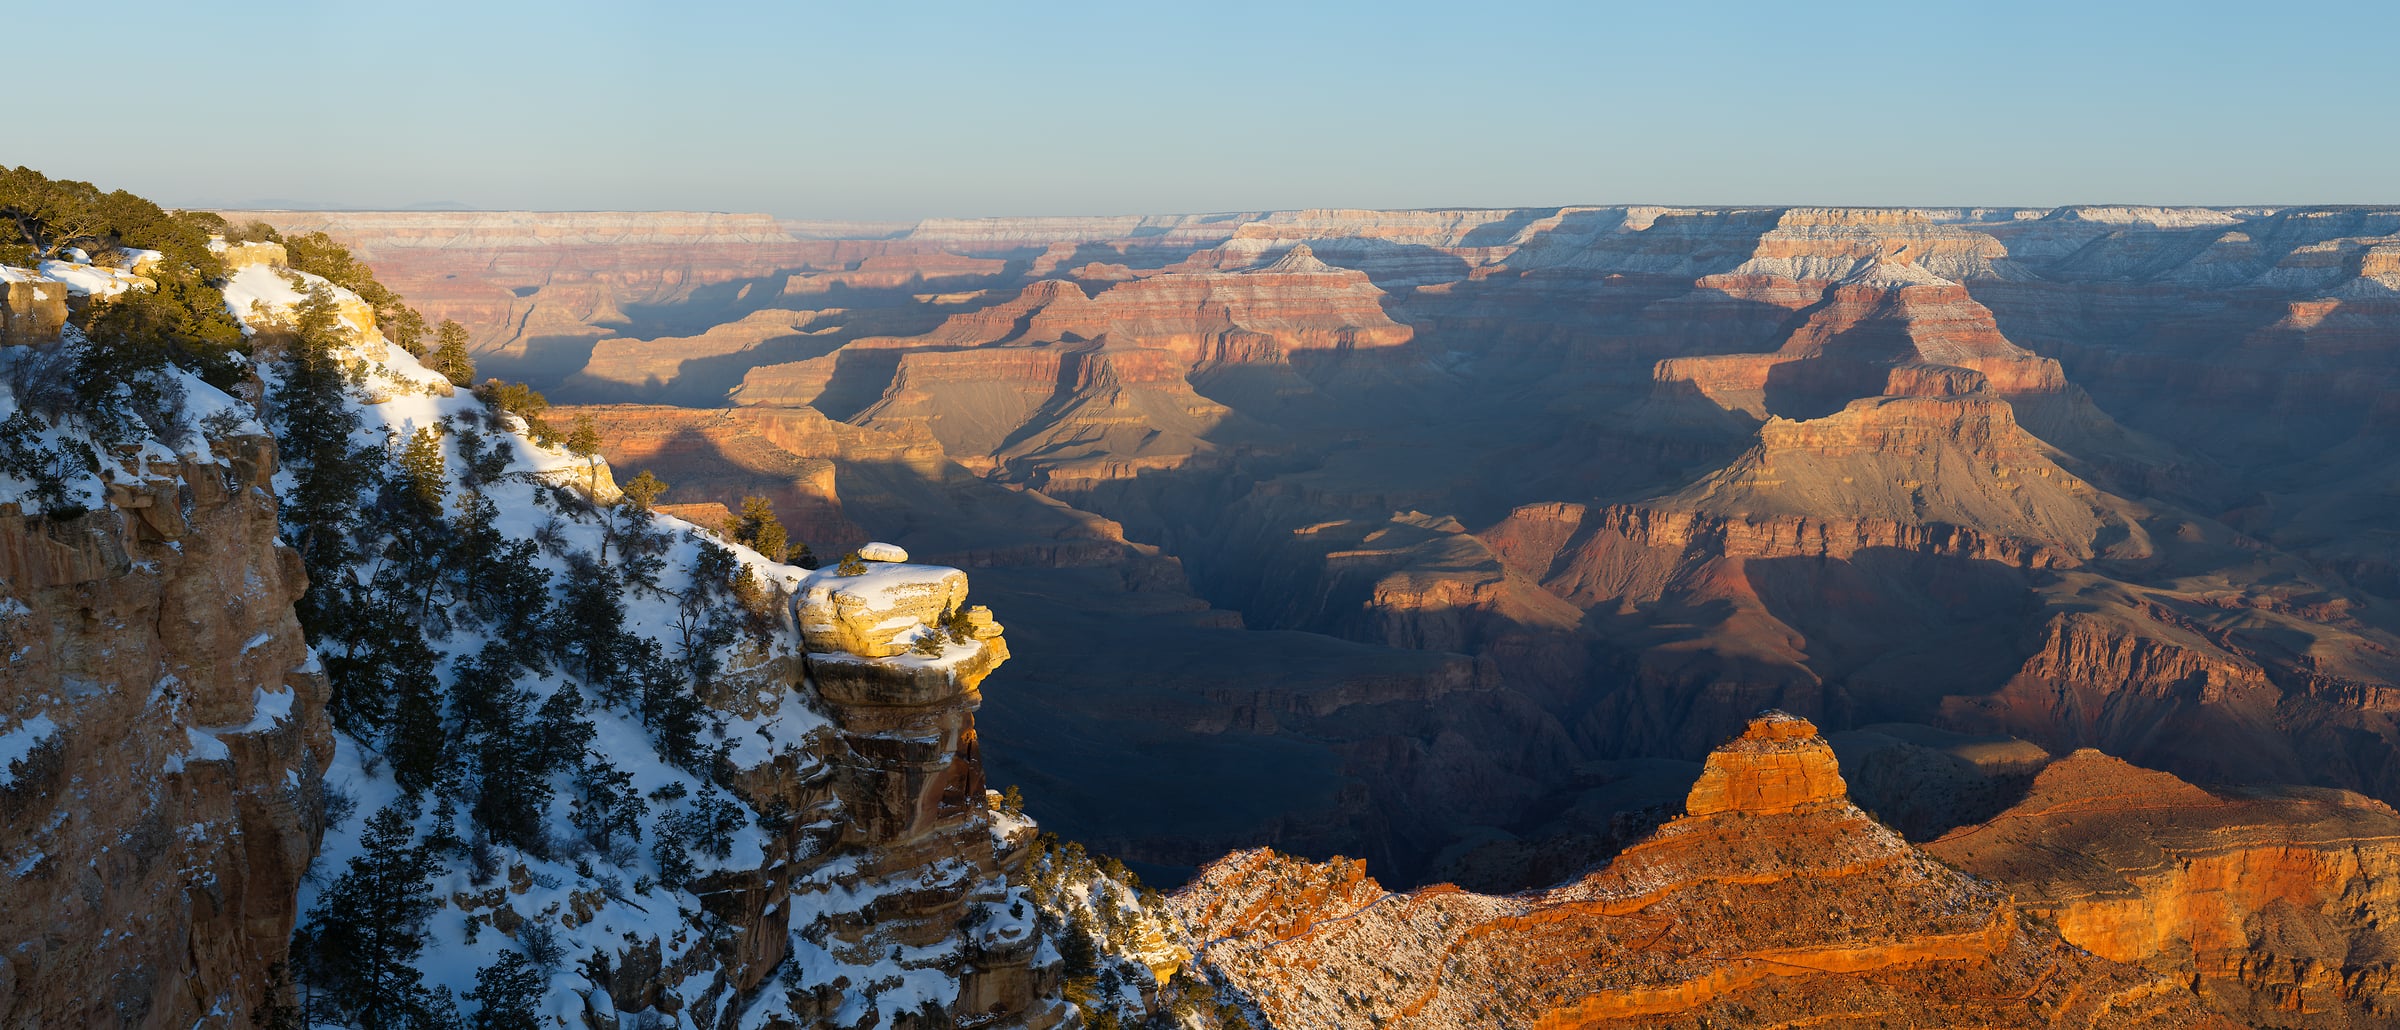 534 megapixels! A very high resolution, large-format VAST photo print of the Grand Canyon at sunrise; landscape photograph created by Greg Probst in Grand Canyon National Park, Arizona.